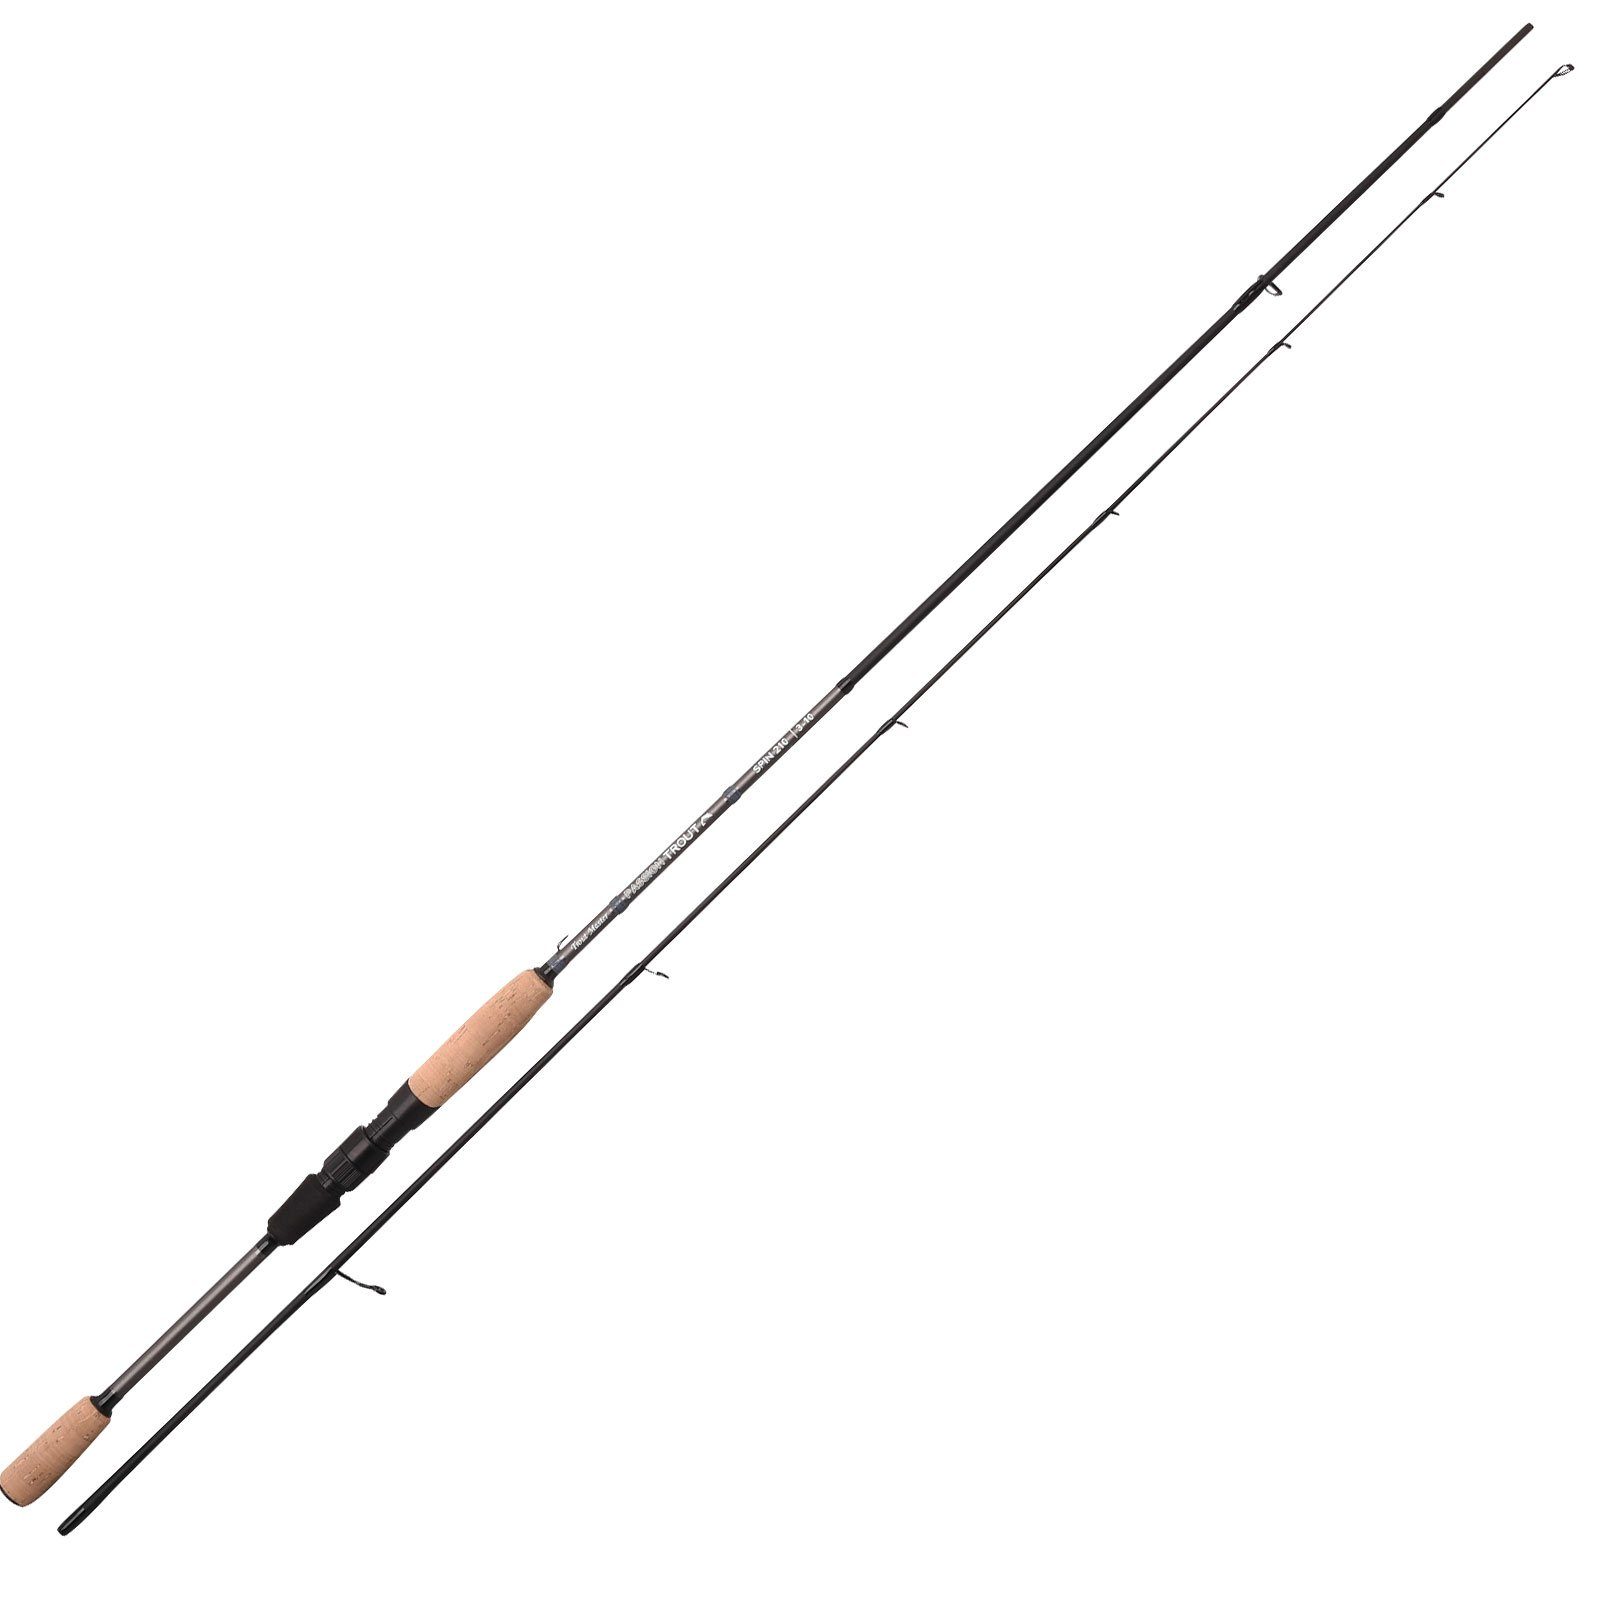 SPRO Forellenrute Master (2-tlg), 2.40m 5-20 Trout Trout Passion Spro Spin 3-10g Forellenrute,